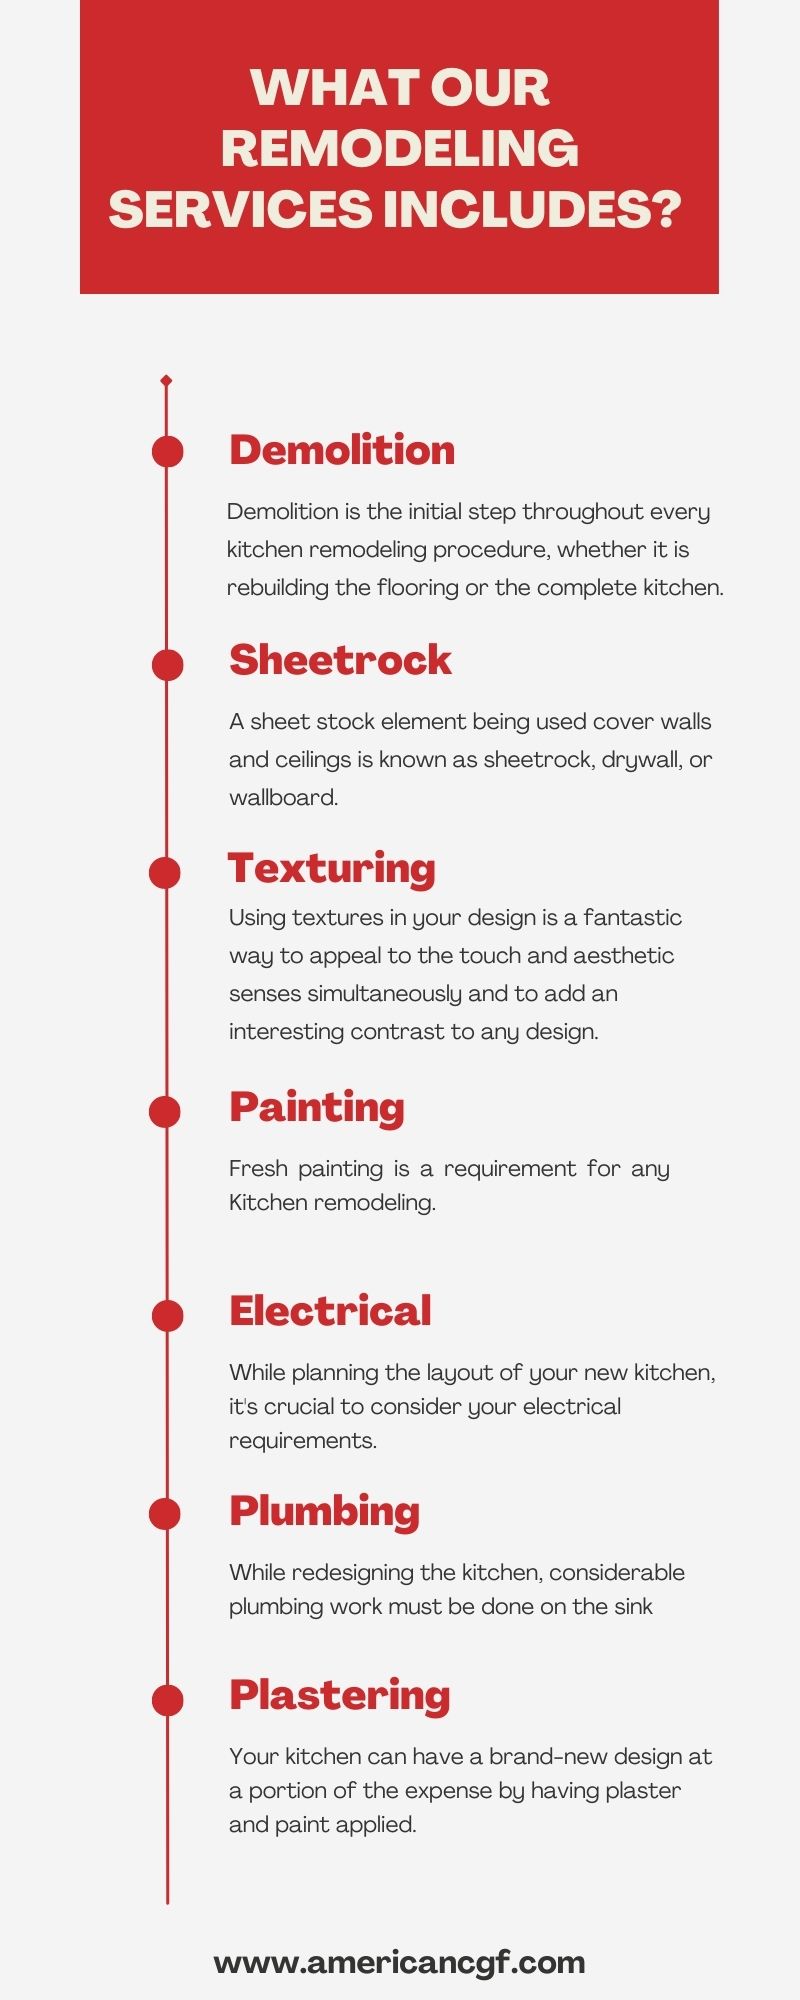 What Do Our Remodeling Services include?